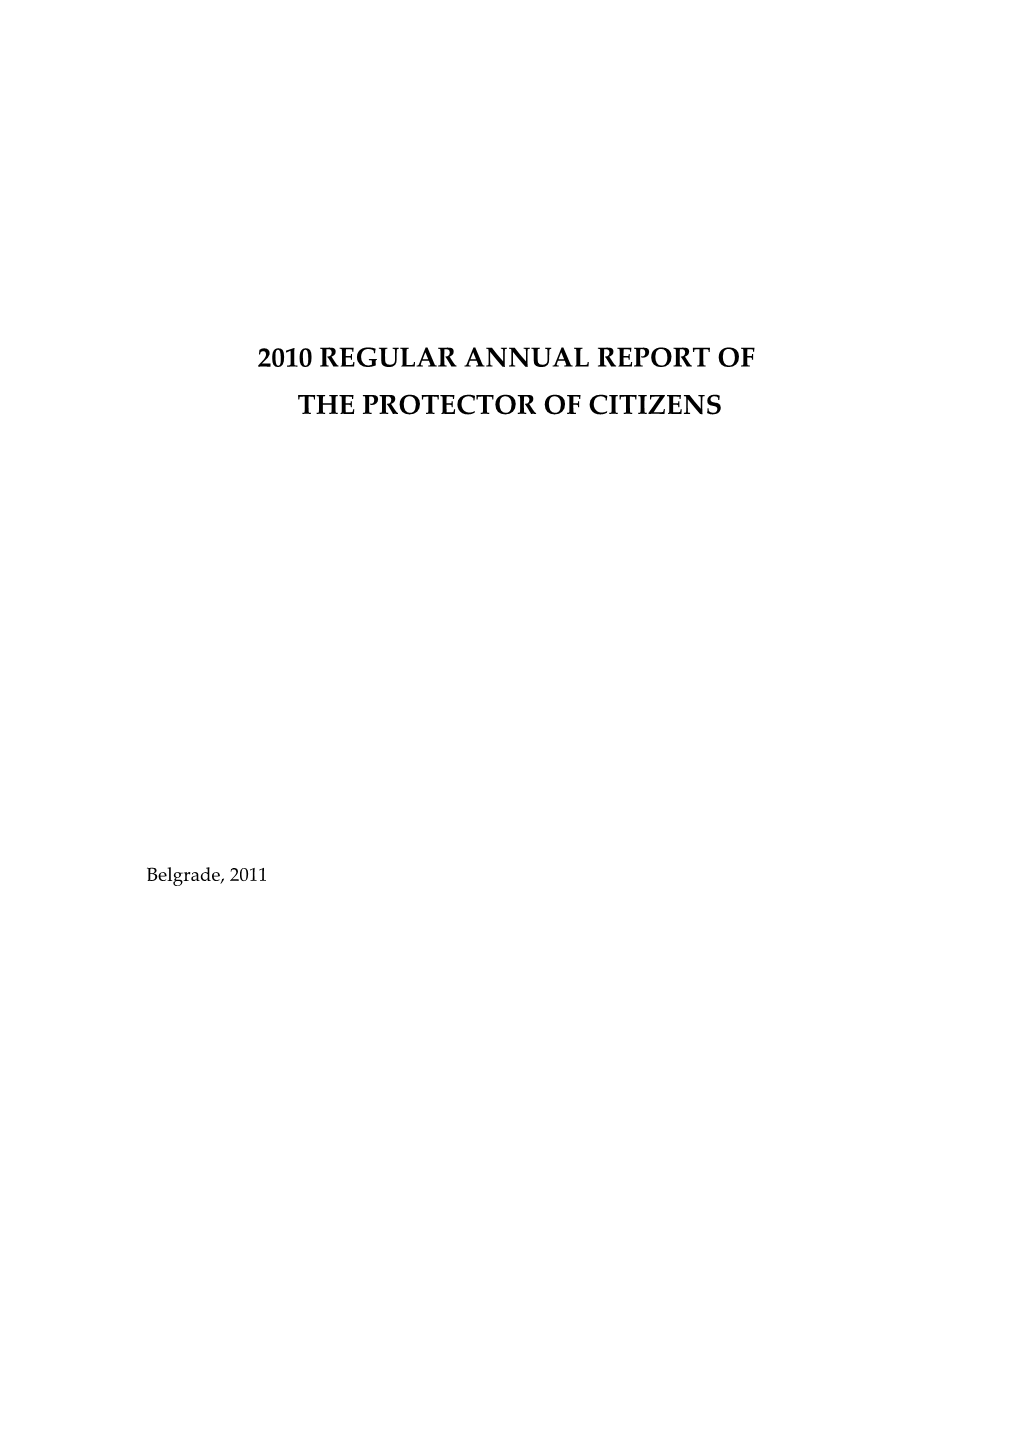 Exercise and Protection of Citizens Rights and Freedoms in Serbia- General Overview 6